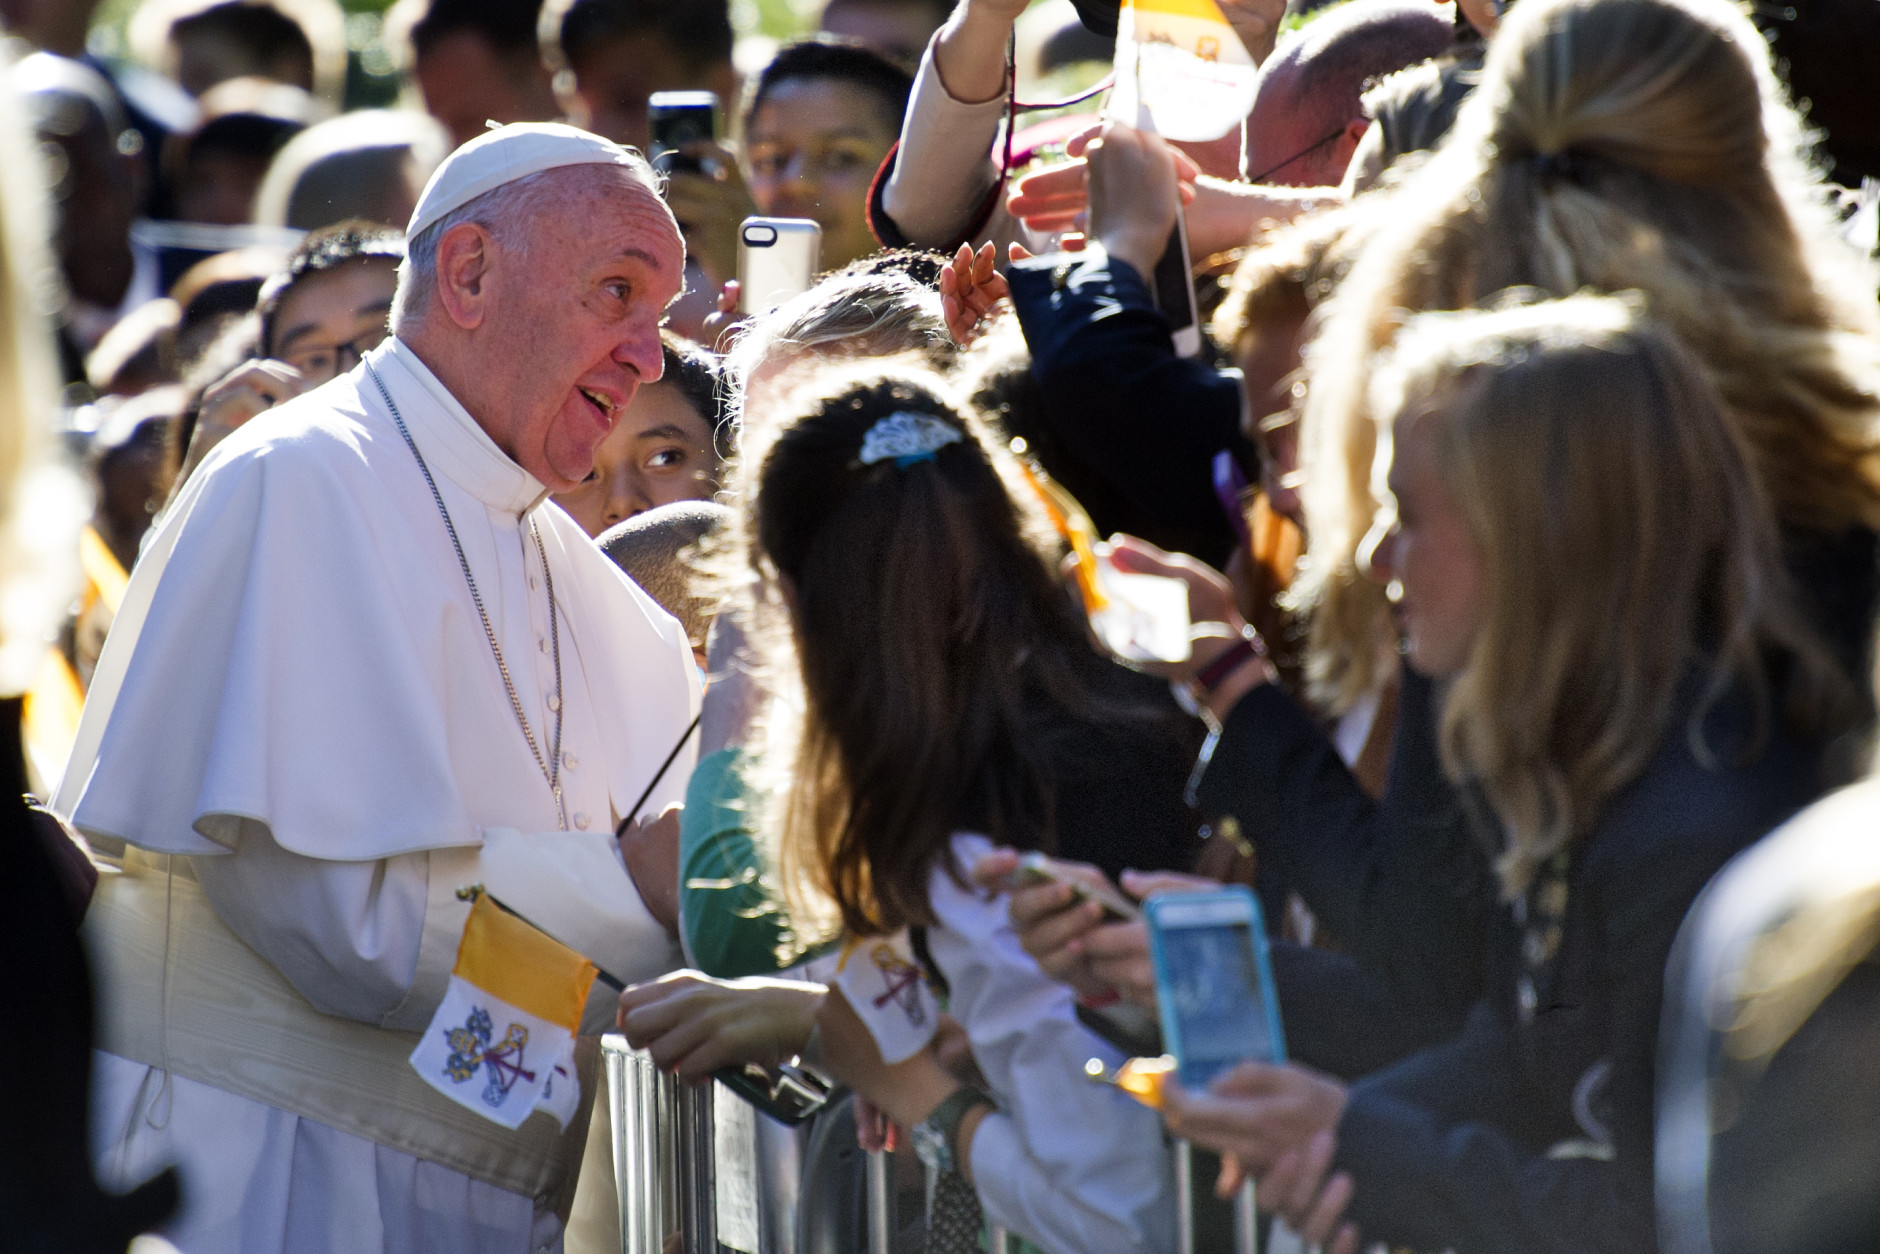 Pope Francis talks with school children as he departs the Apostolic Nunciature, the Vatican's diplomatic mission in the heart of Washington, Wednesday, Sept. 23, 2015. Pope Francis will visit the White House, becoming only the third pope to visit the White House.  (AP Photo/Cliff Owen)